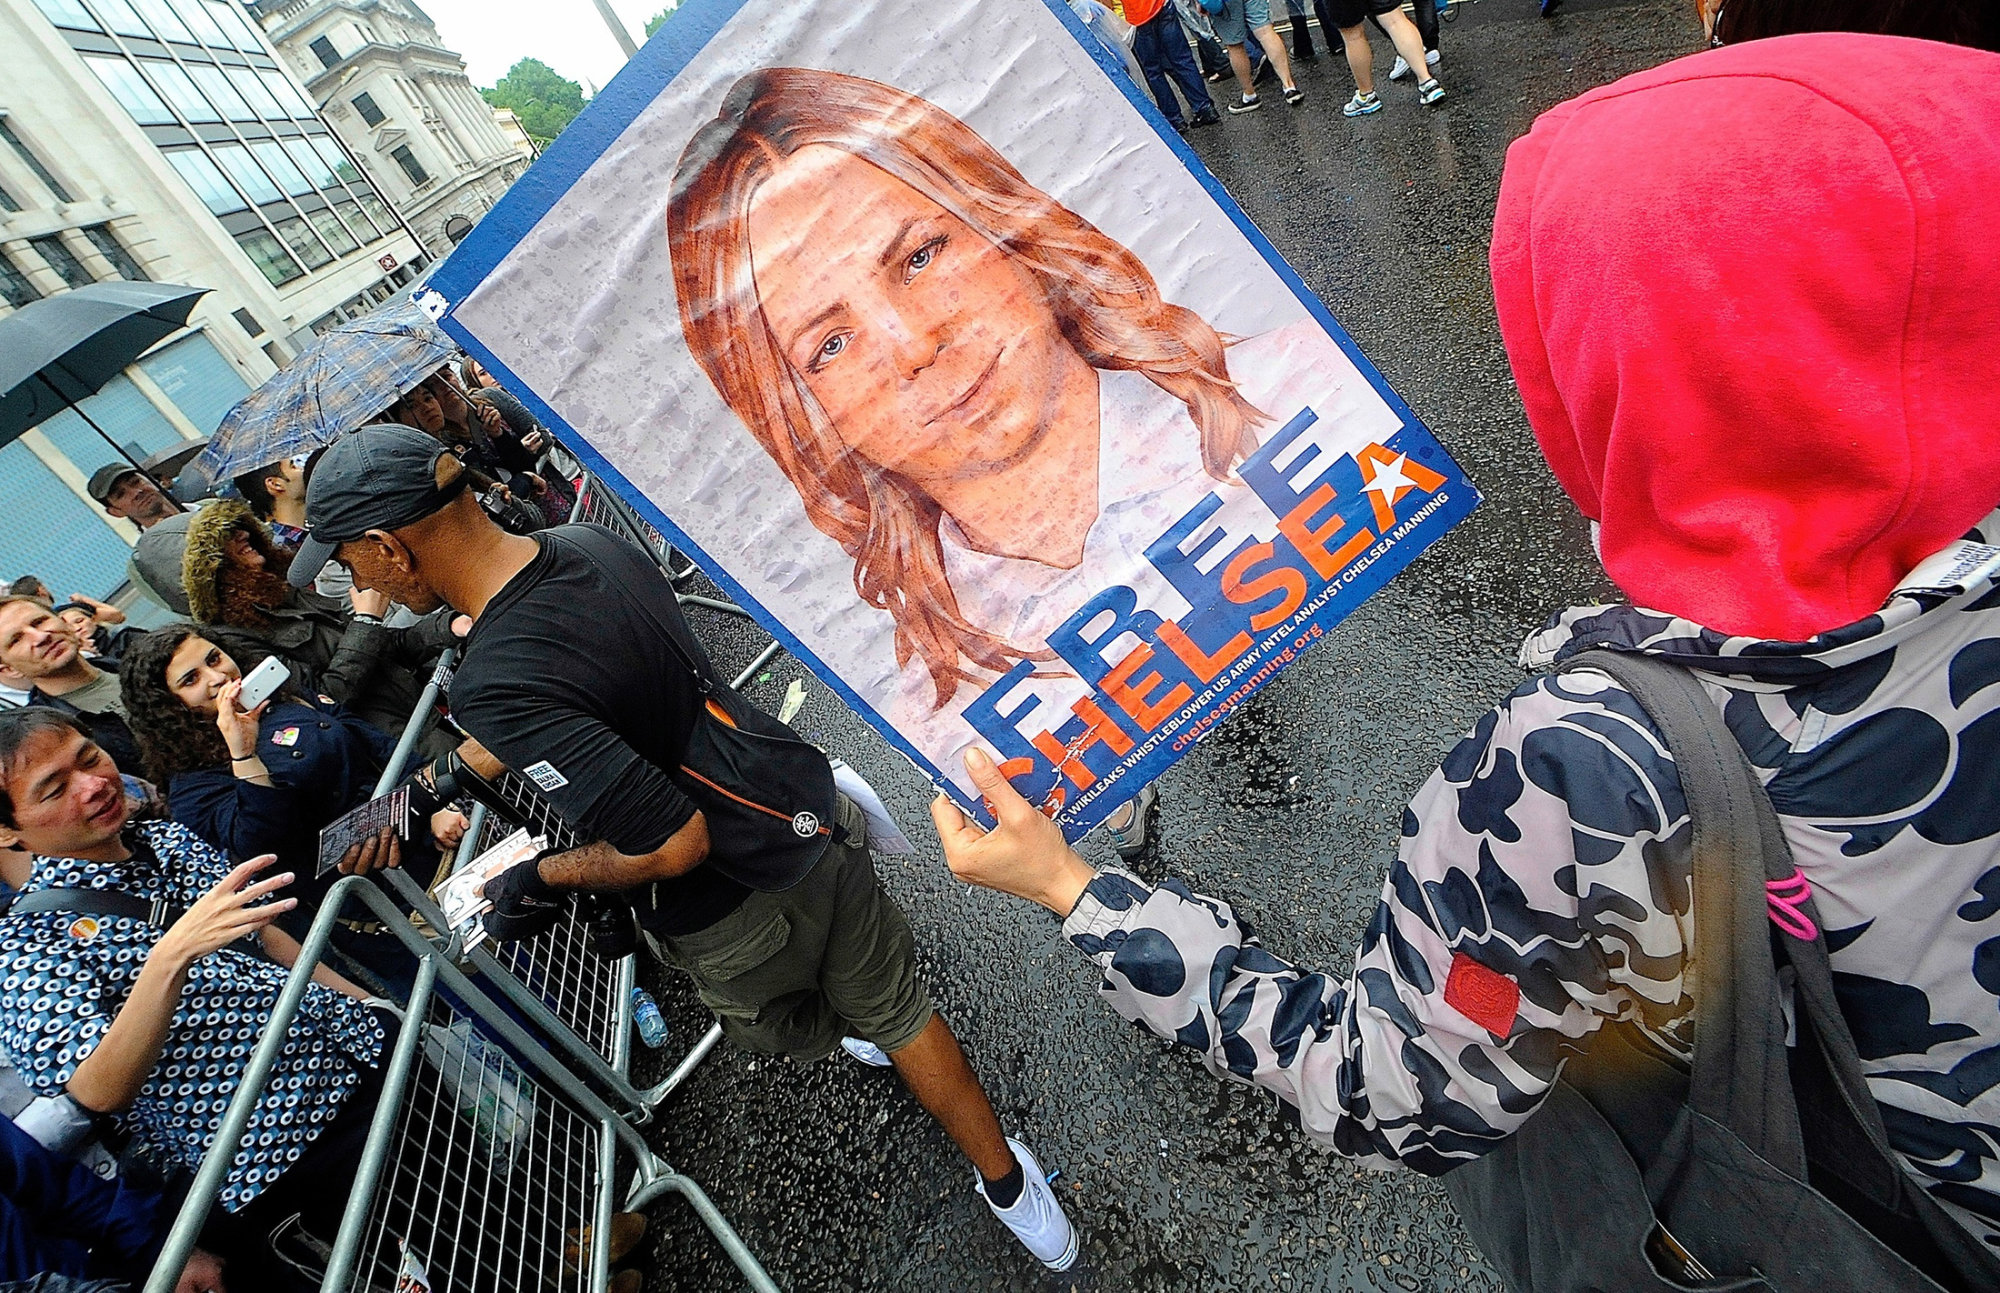 A supporter of Chelsea Manning holds a placard during a pride parade in London.
